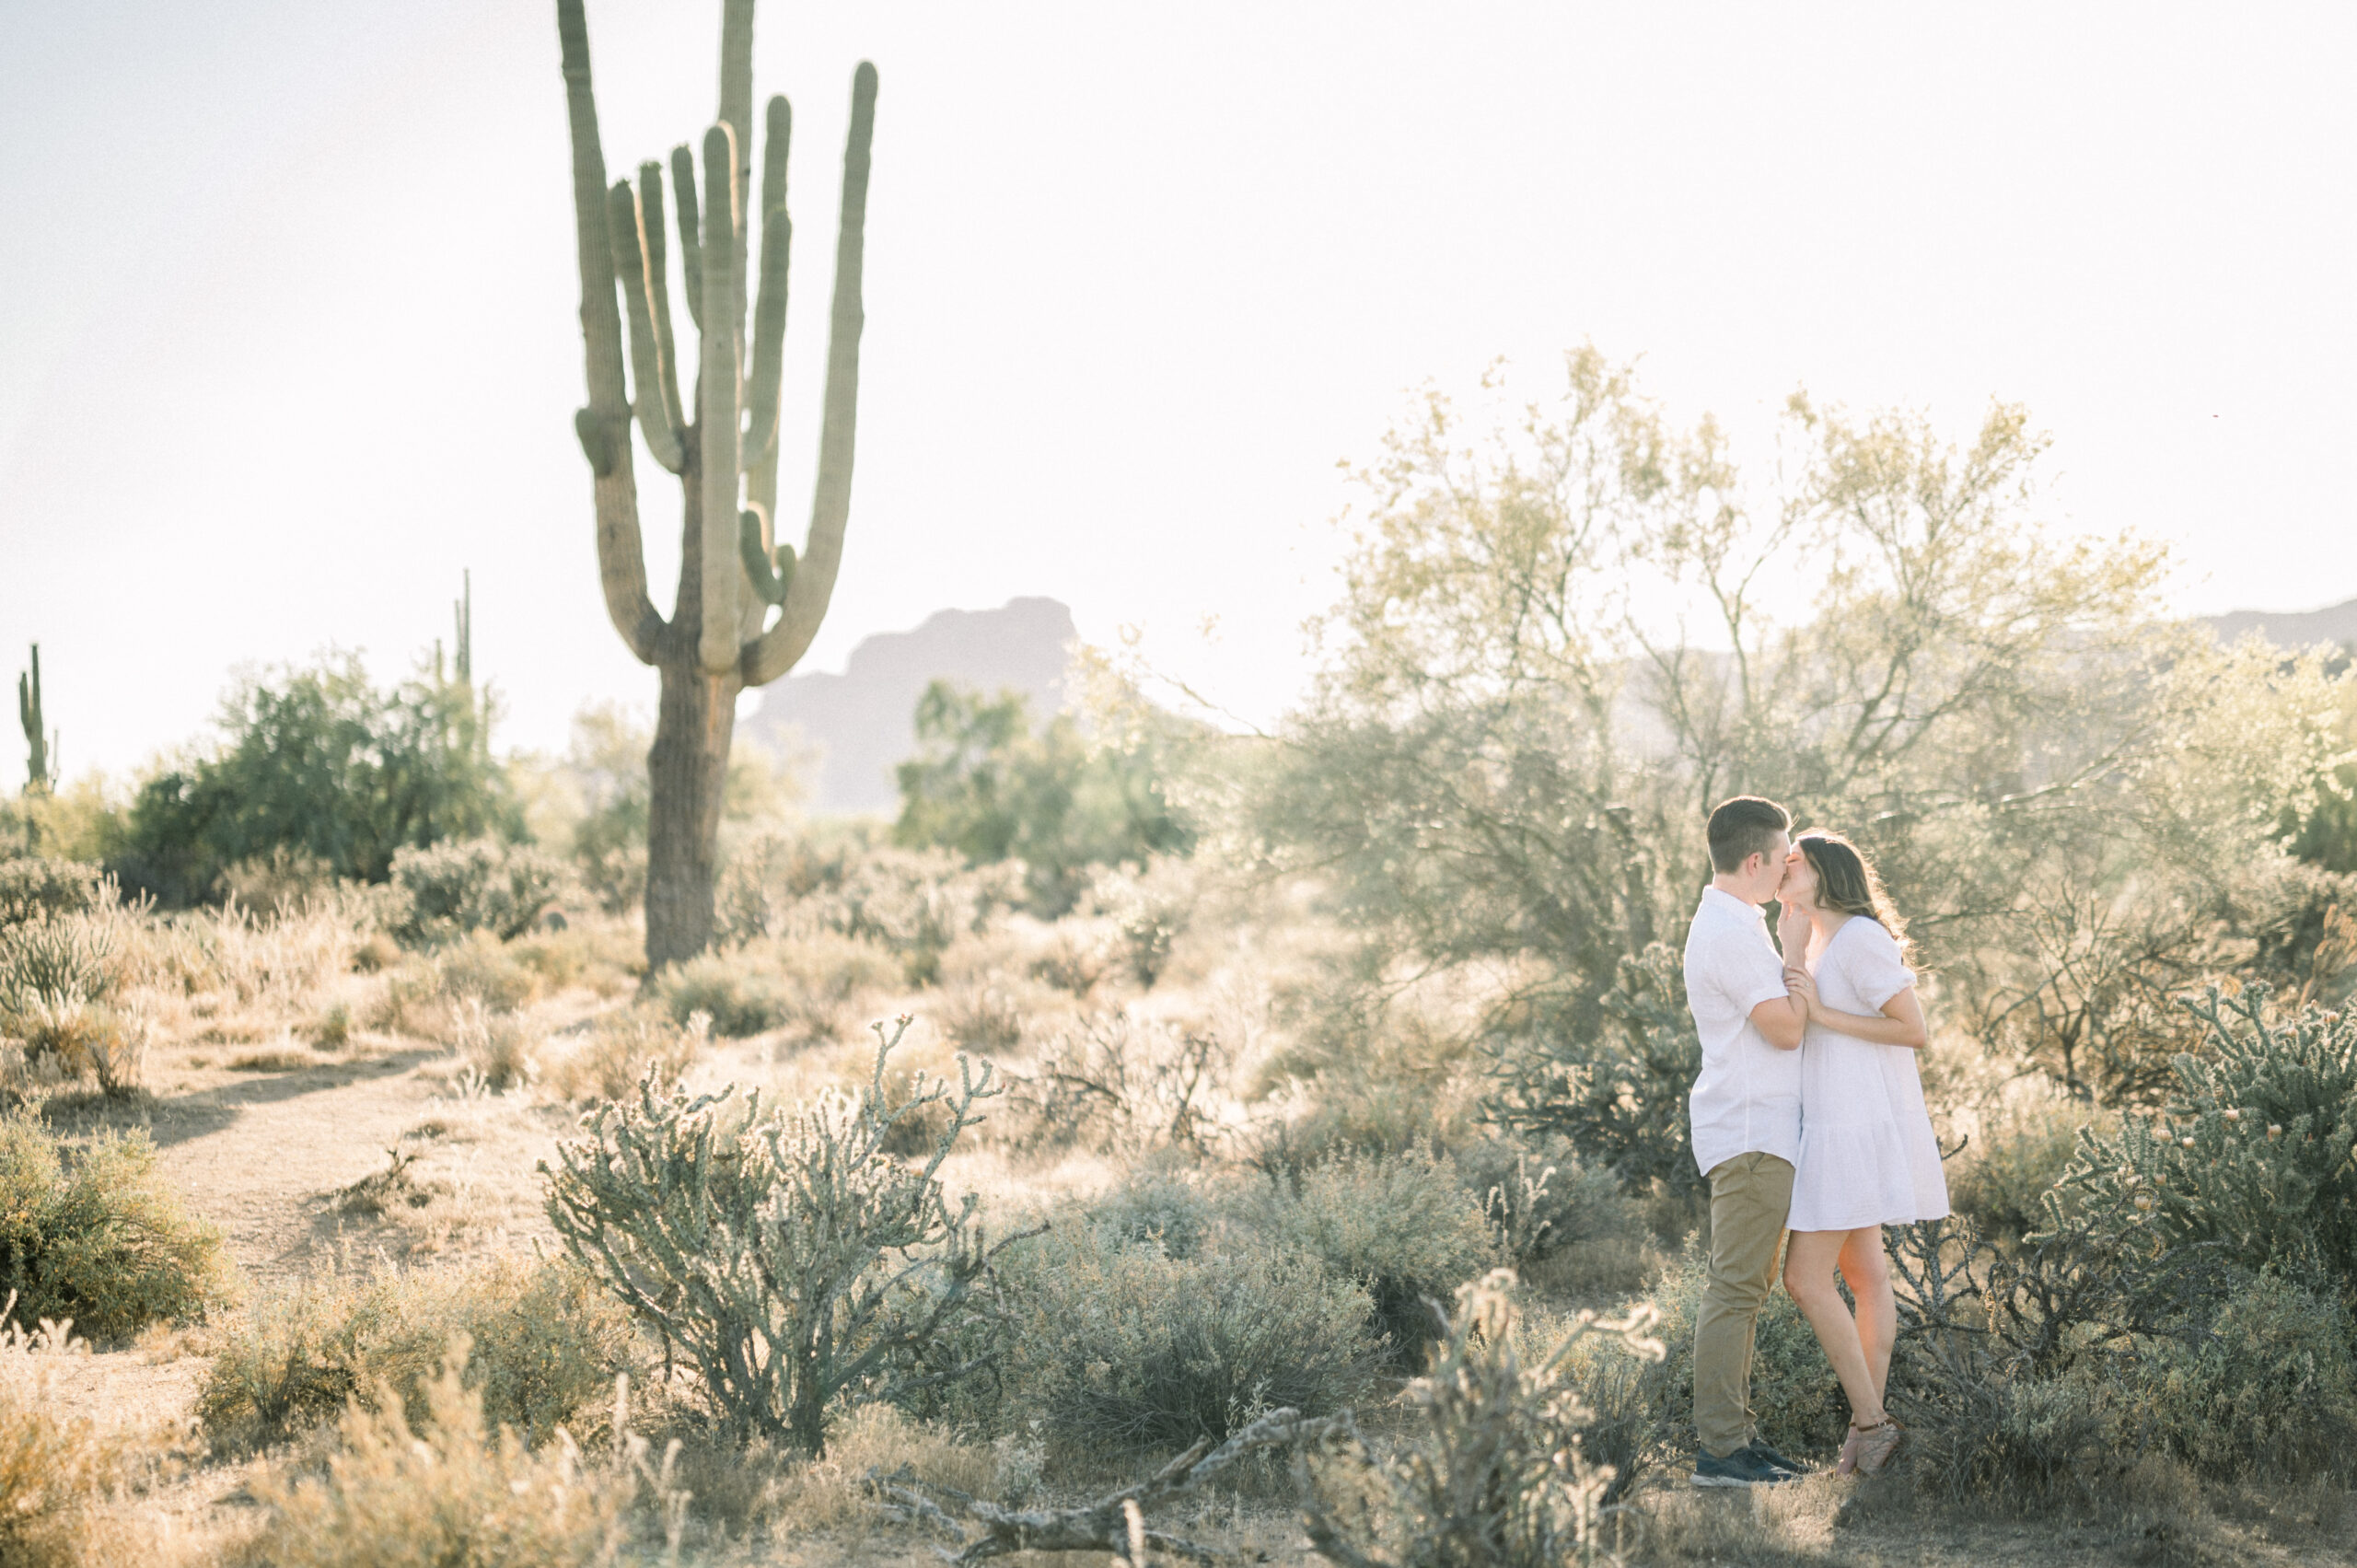 Ava + Nathans Salt River desert engagement session was stunning. The desert was blooming this spring which made their session even more beautiful!